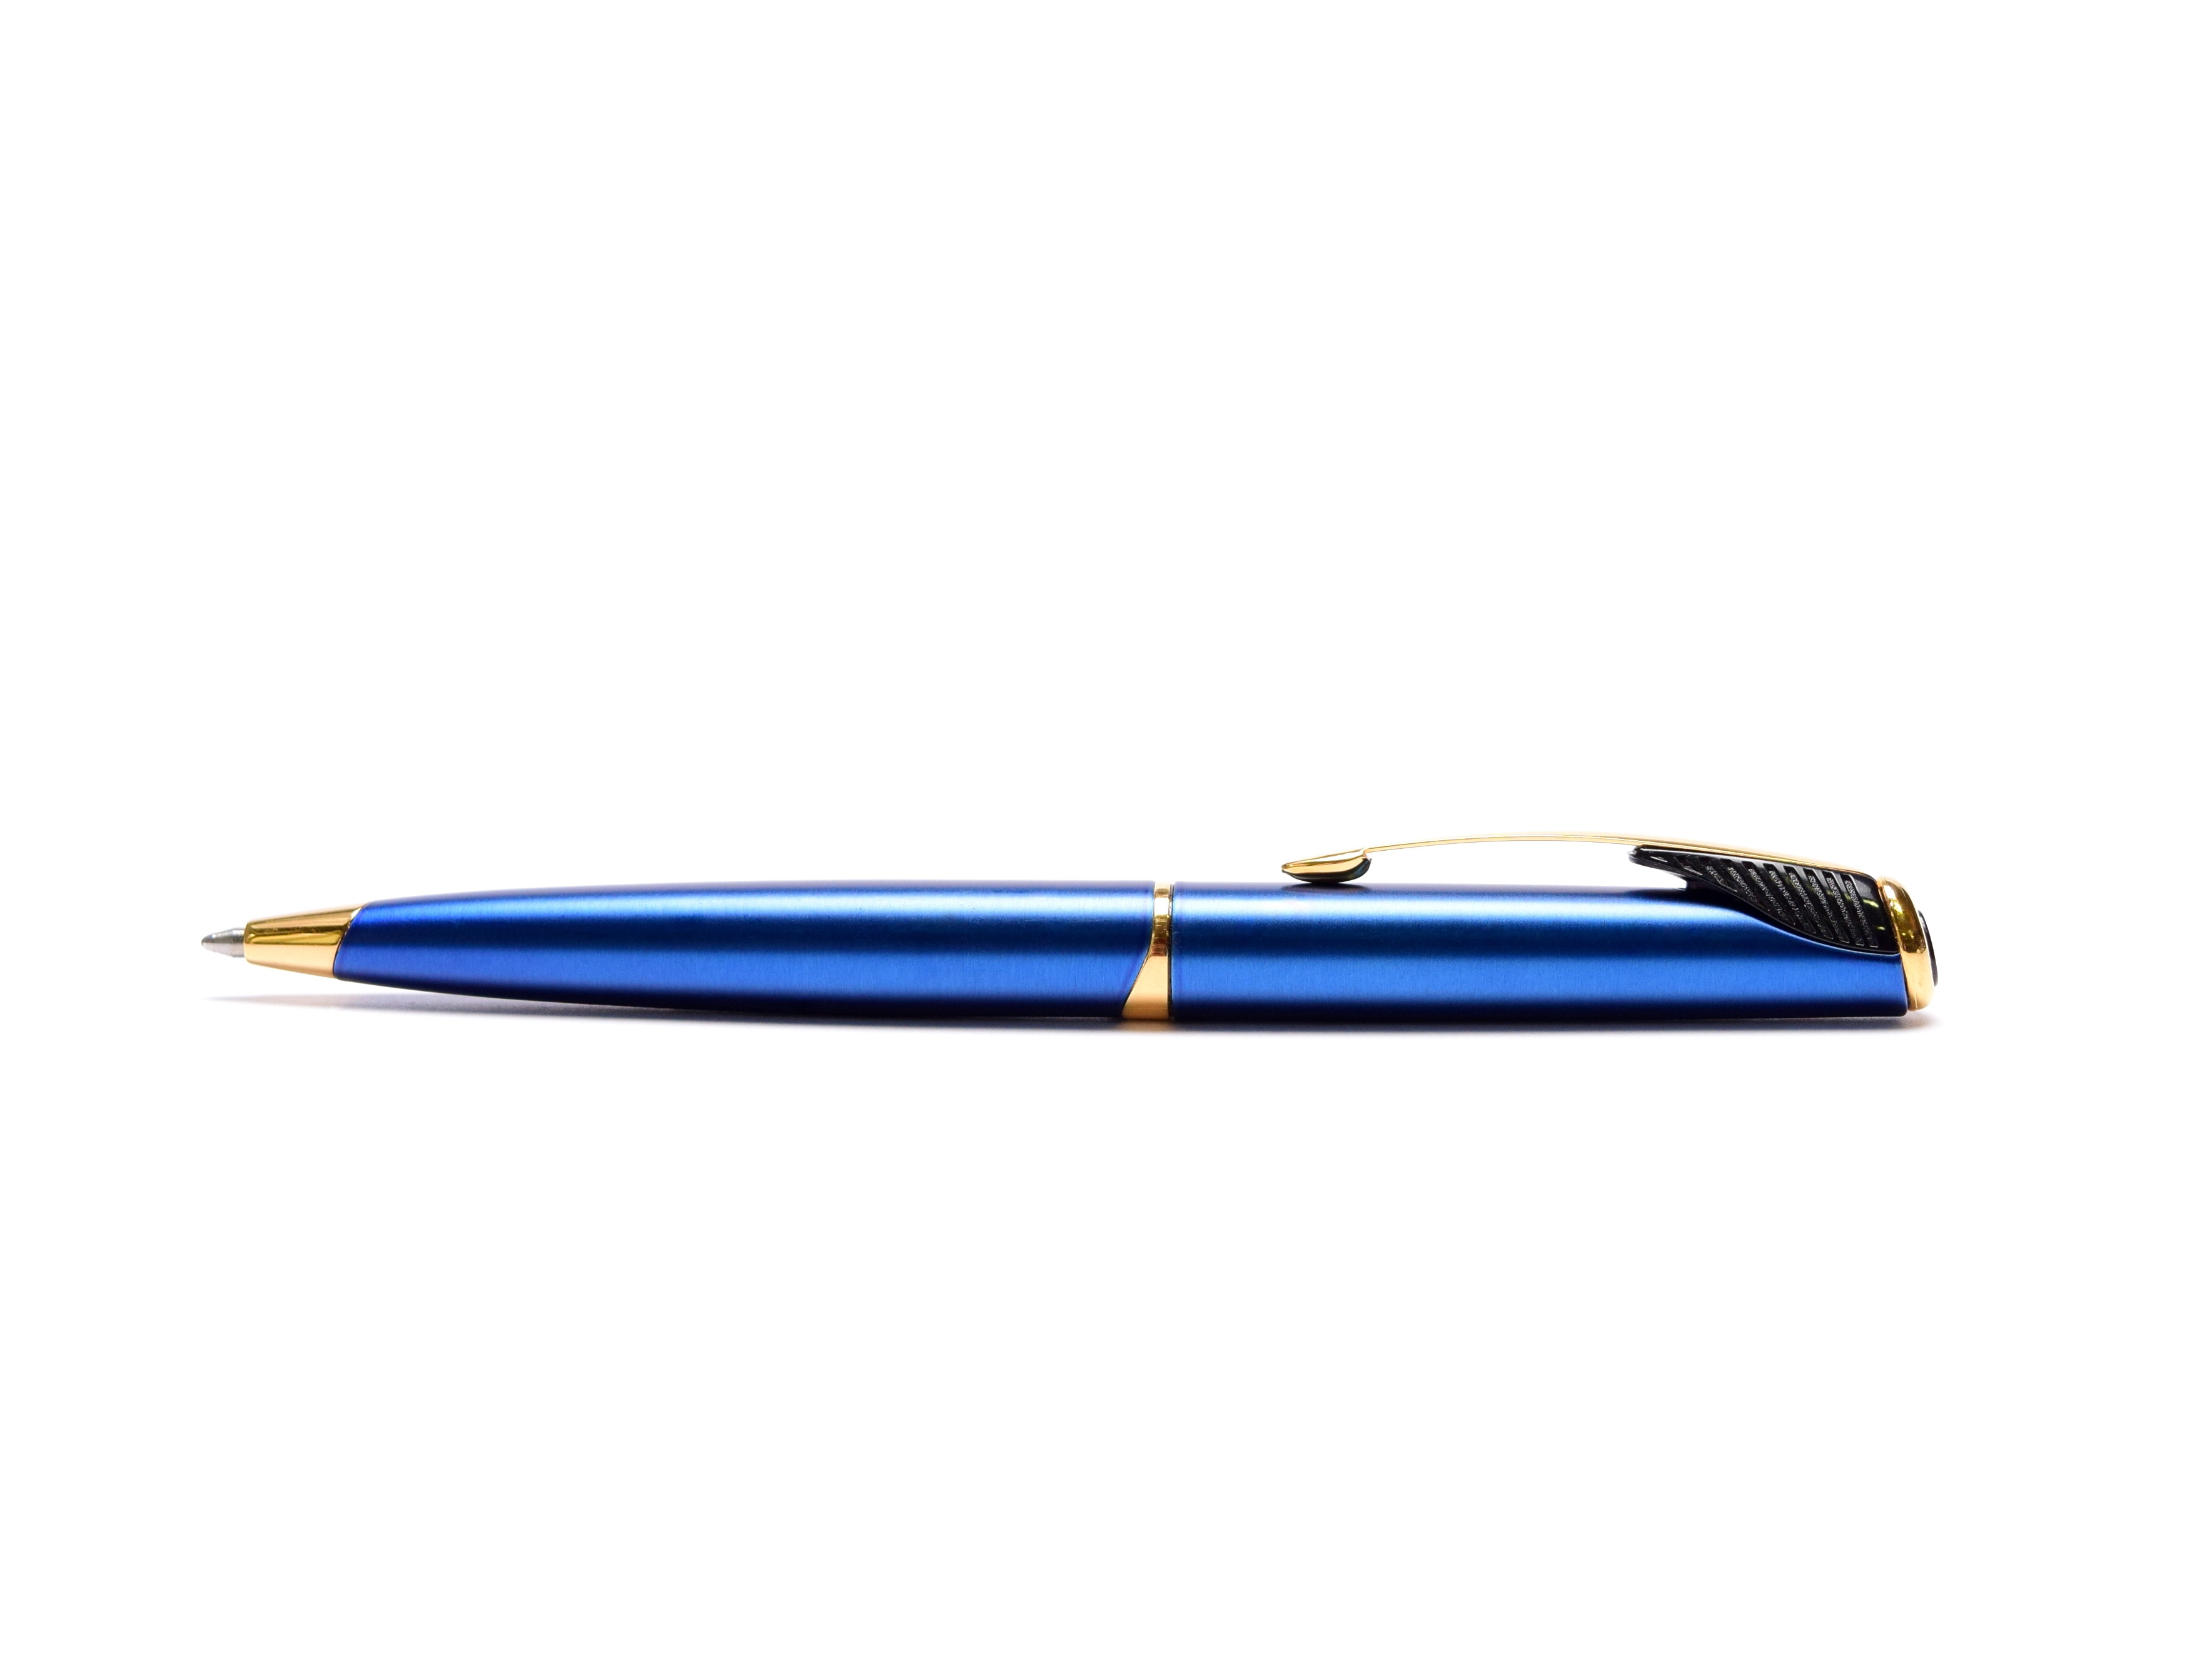 Parker  Inflection Blue & 14Kt Gold  Trim  Rollerball PEN New In Box 